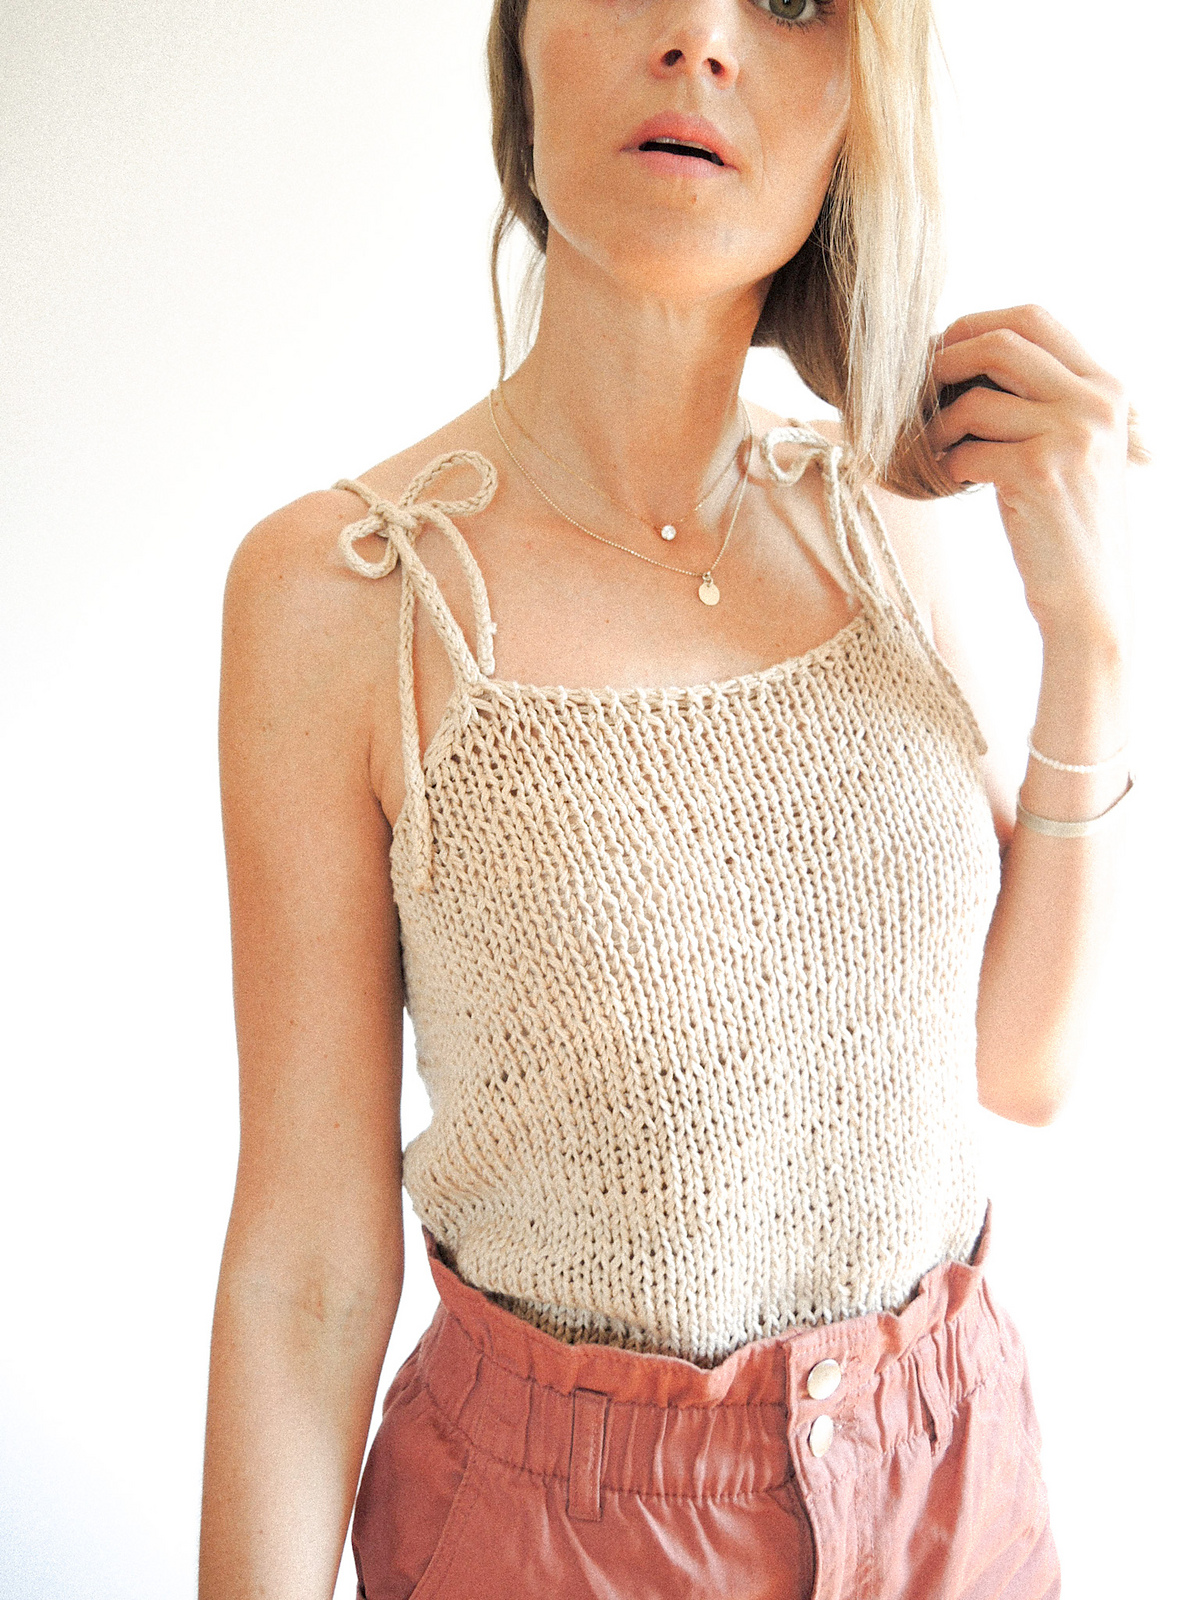 55-most-popular-and-amazing-crochet-top-pattern-ideas-of-2019-and-2020